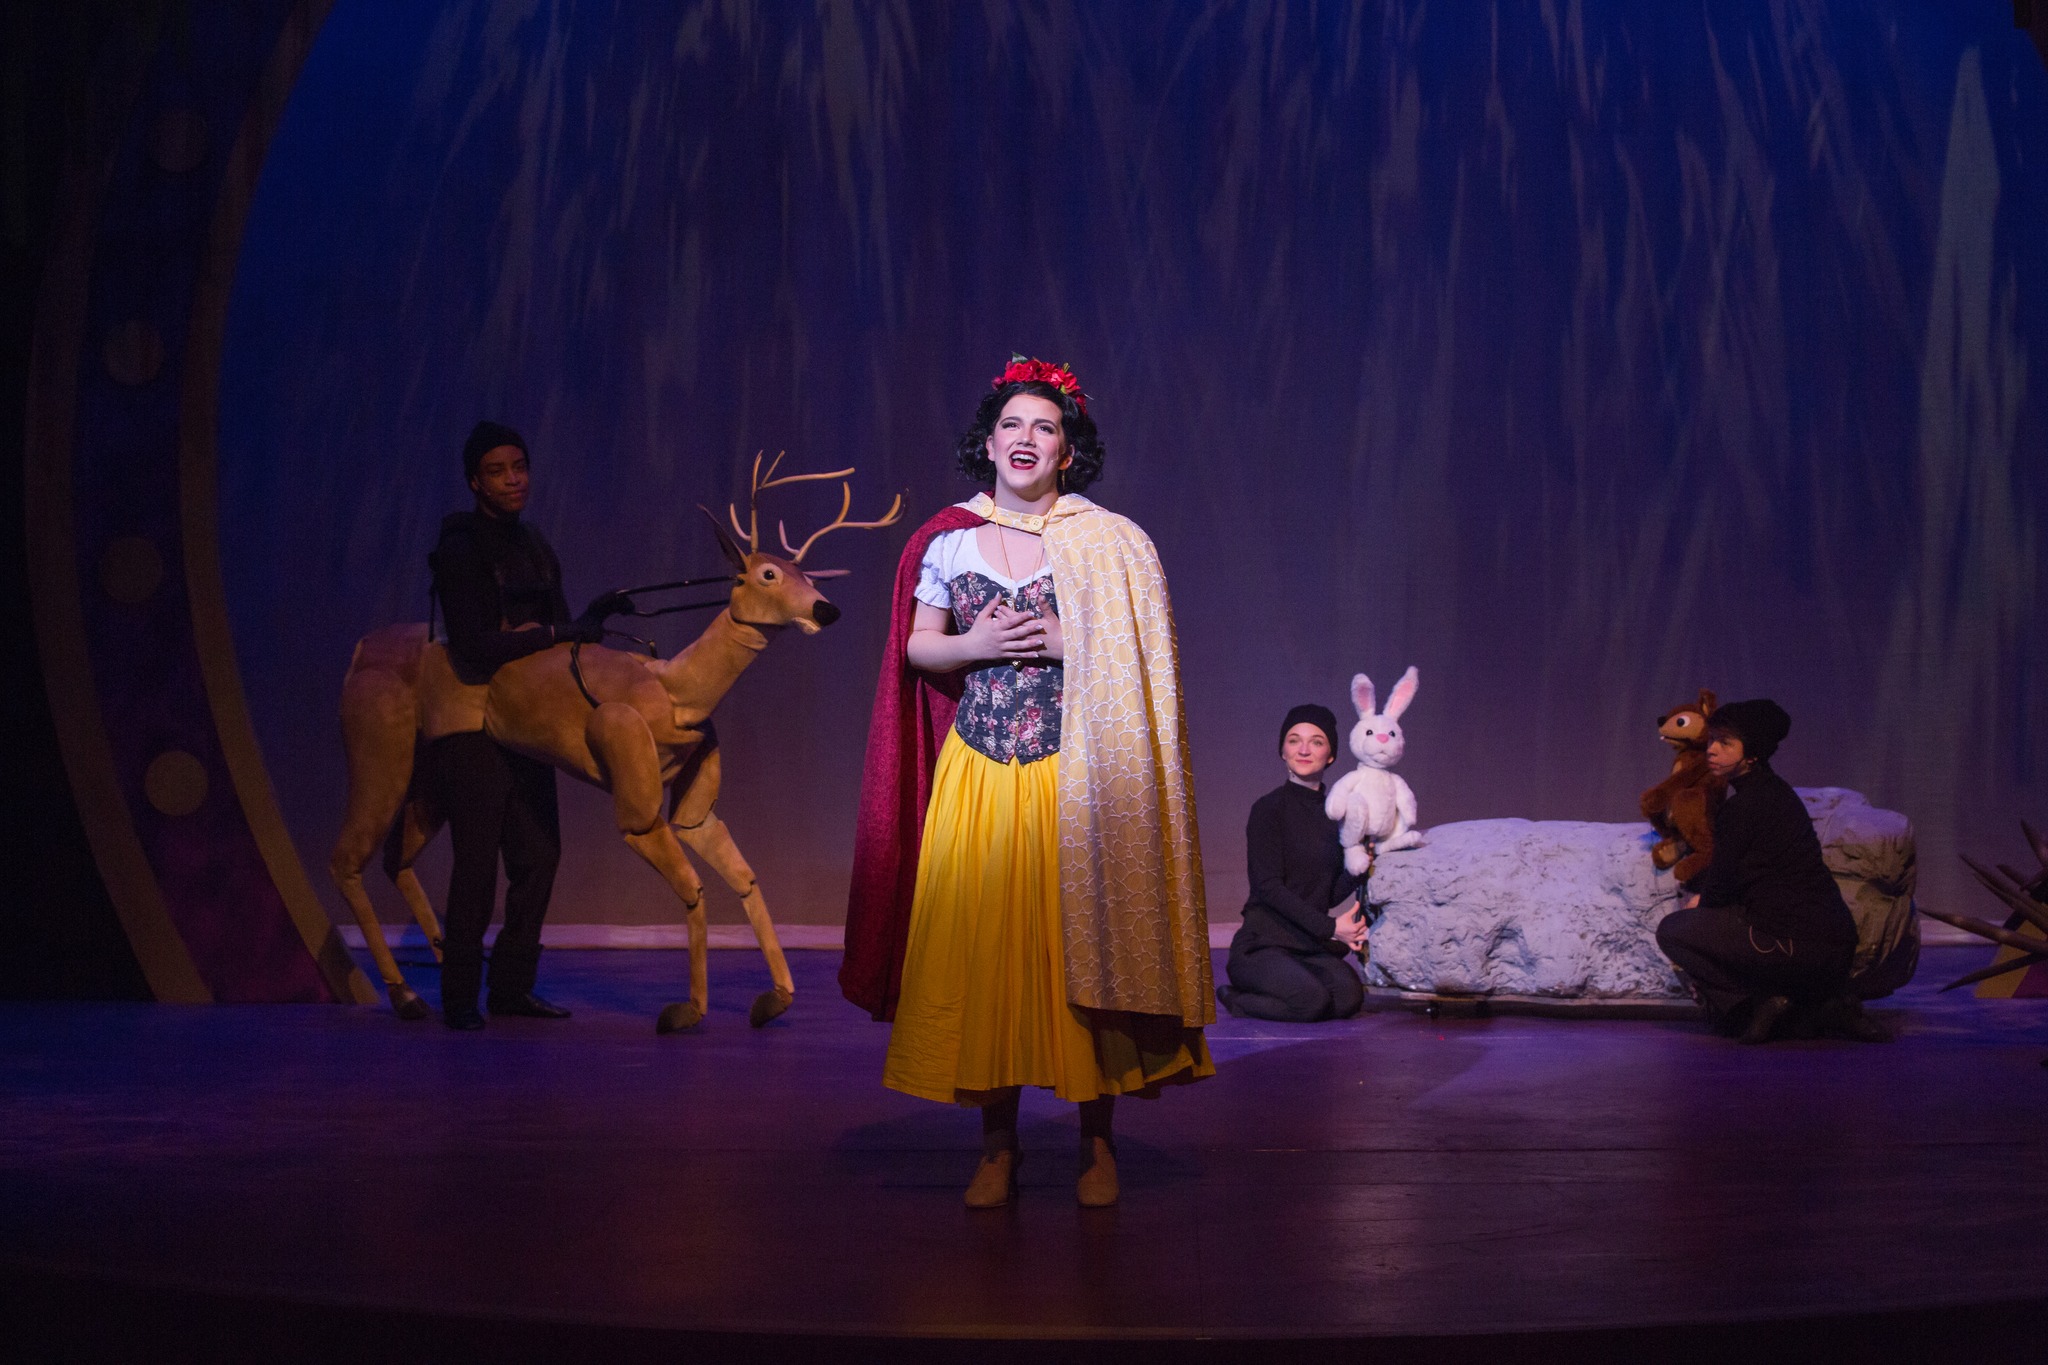 Snow White in "The Princess Plays"